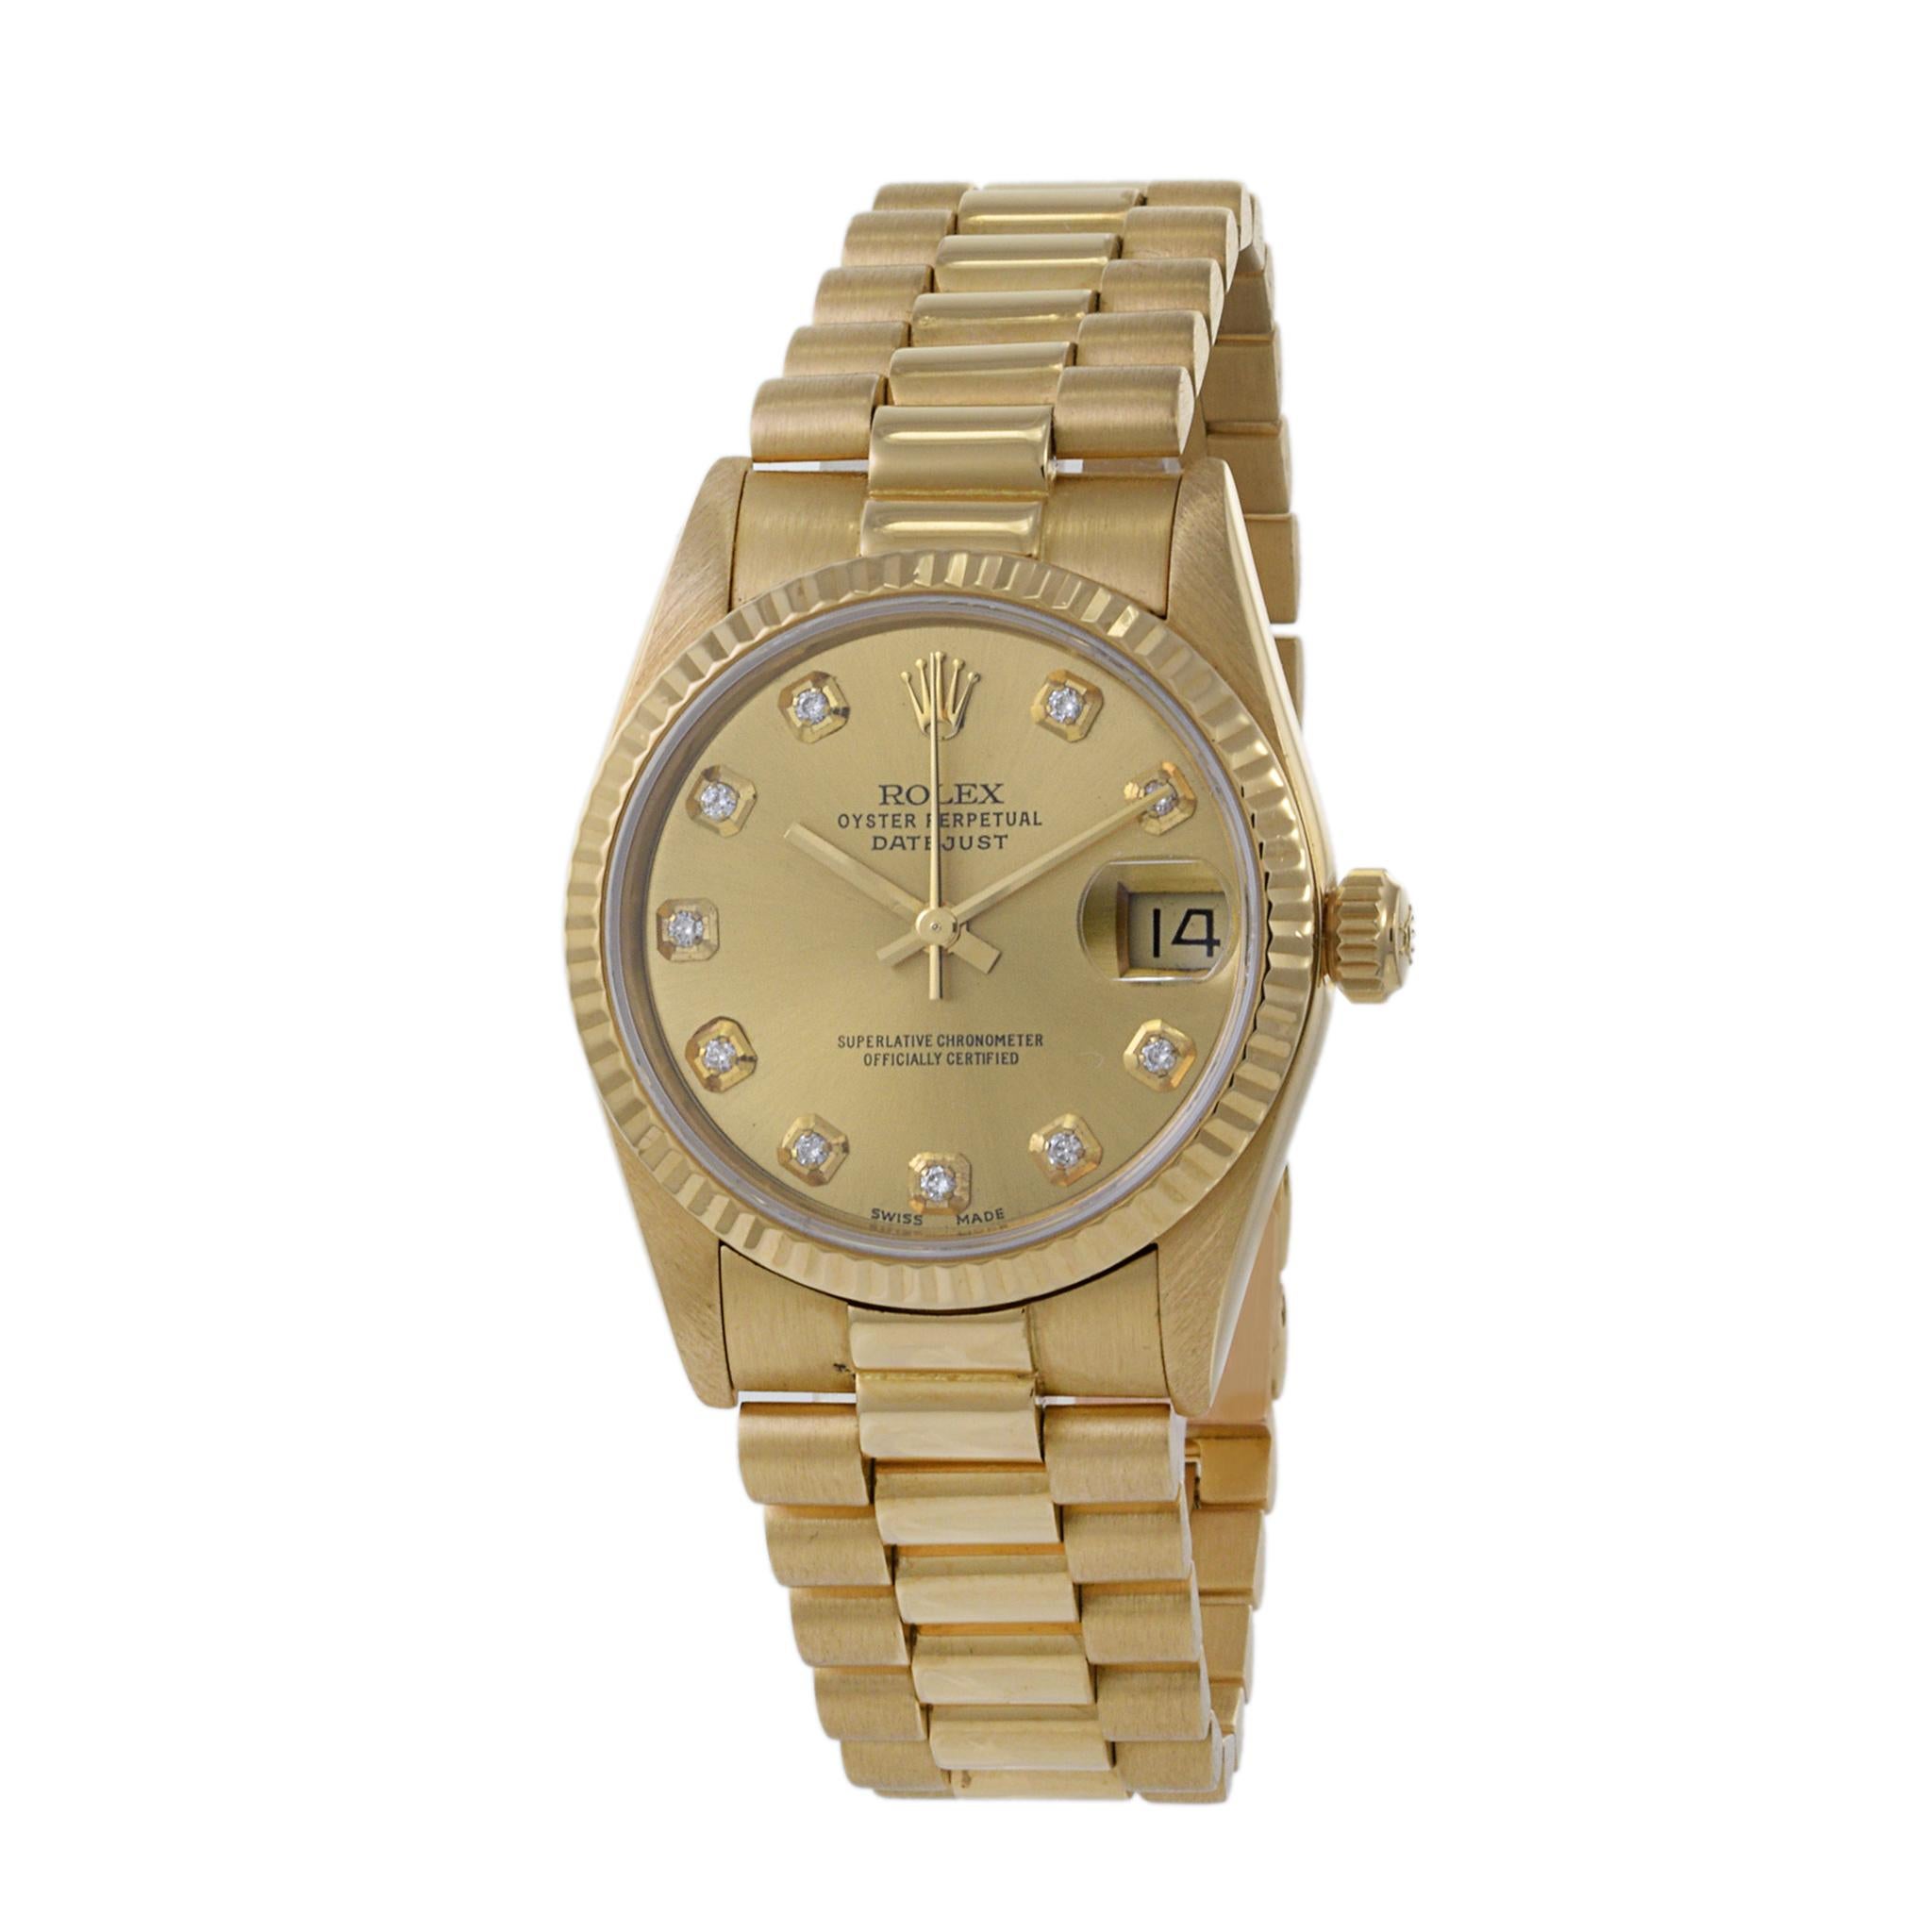 This is a great condition 1986 Rolex 31mm Datejust Reference 68278 in 18K Yellow Gold. This watch is a quickset date model.

The Dial has factory set diamond markers. The original bracelet is the Presidential style.

This watch is powered by a